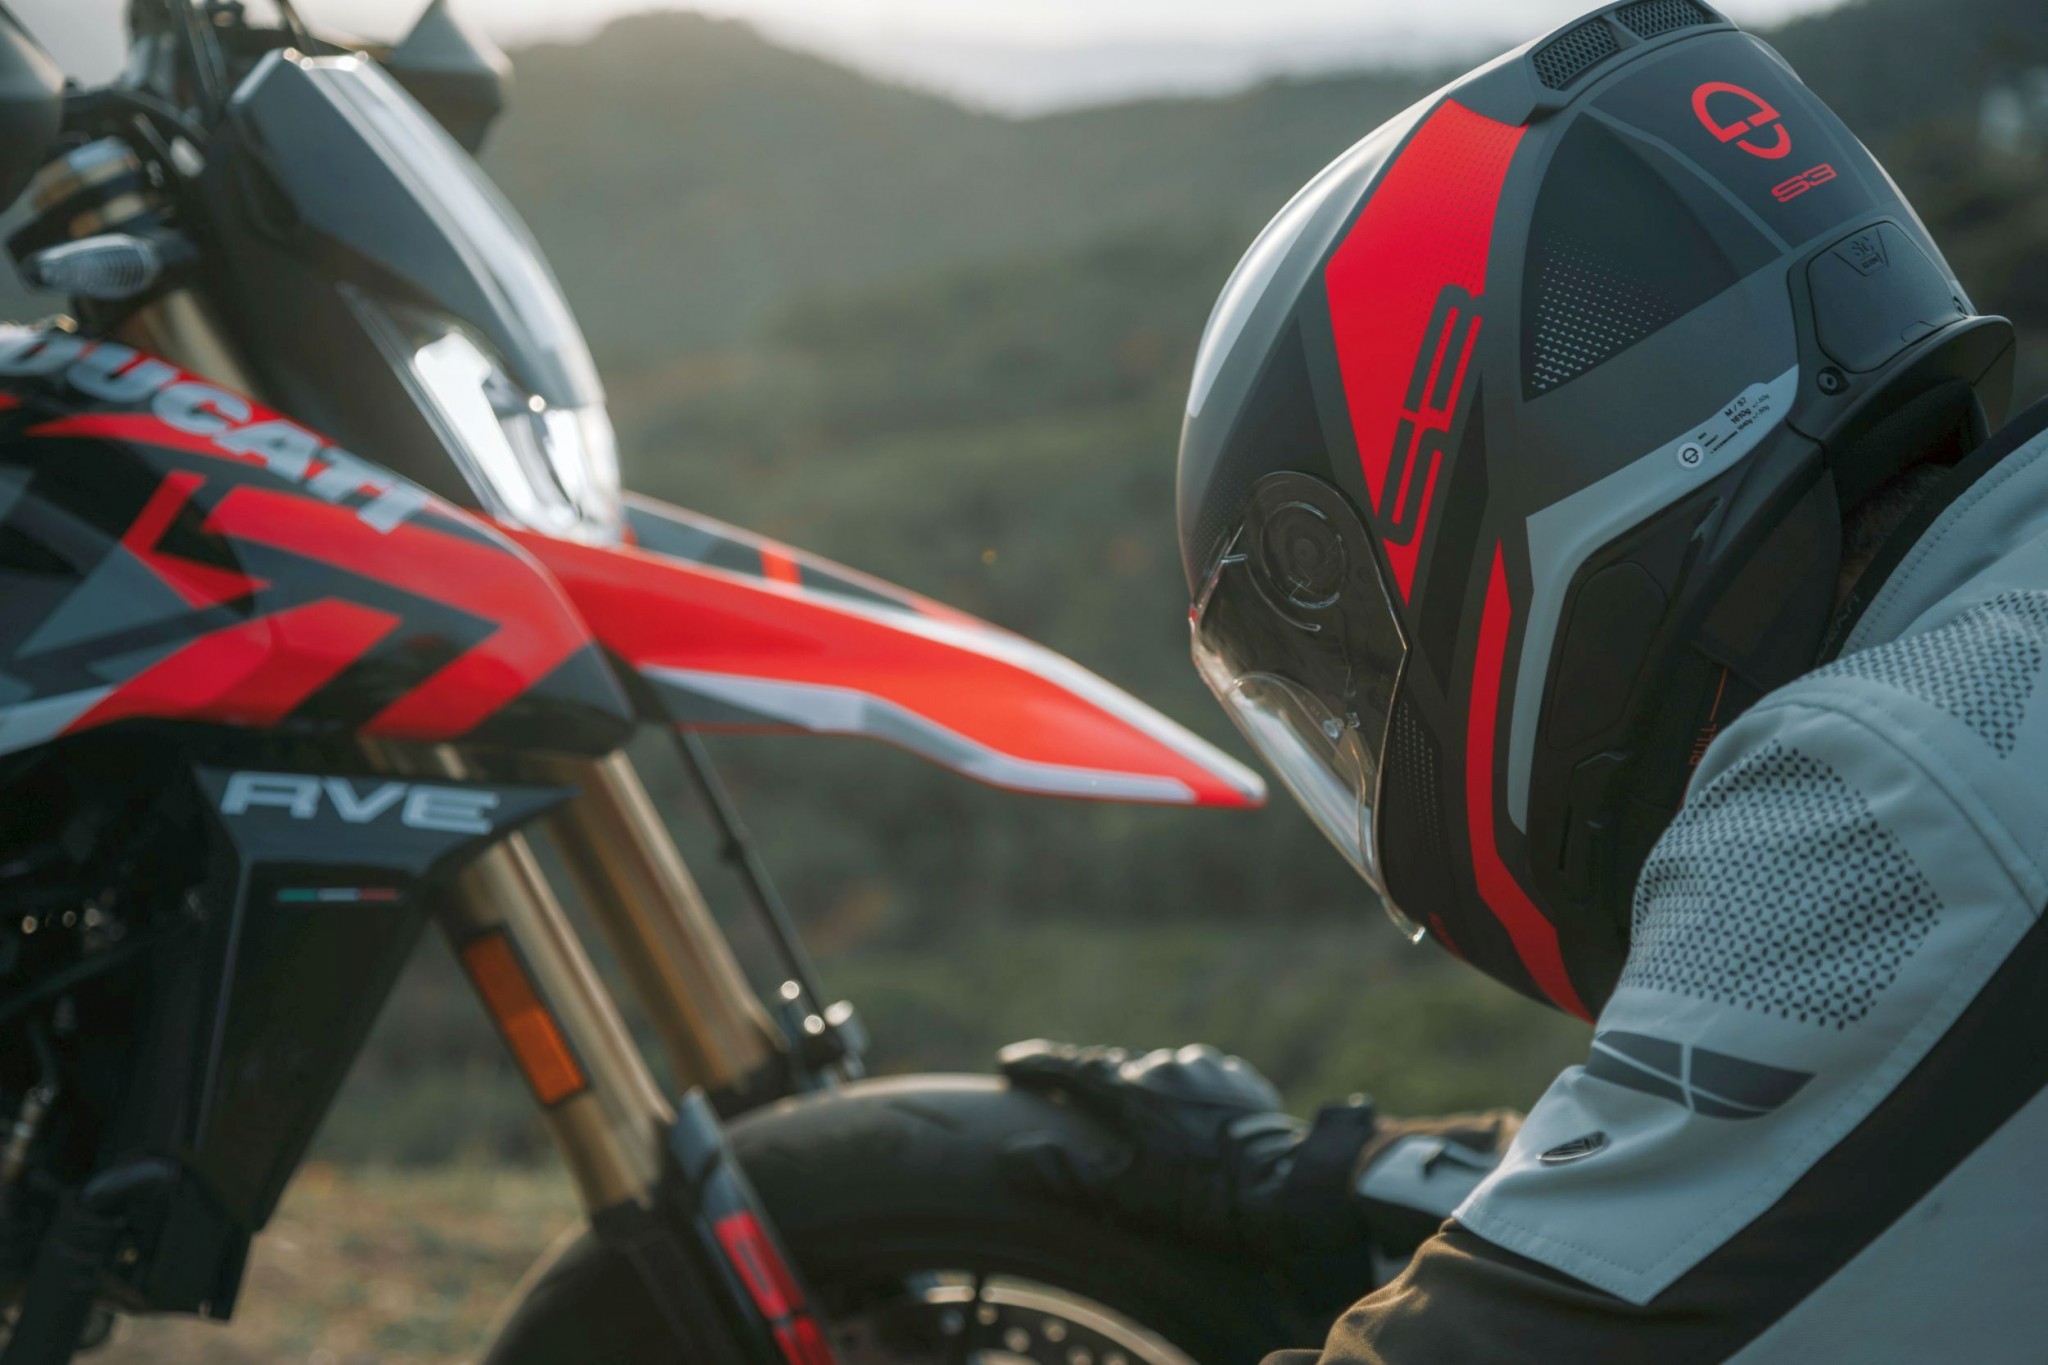 Schuberth S3 sport touring helmet in the test - Image 30